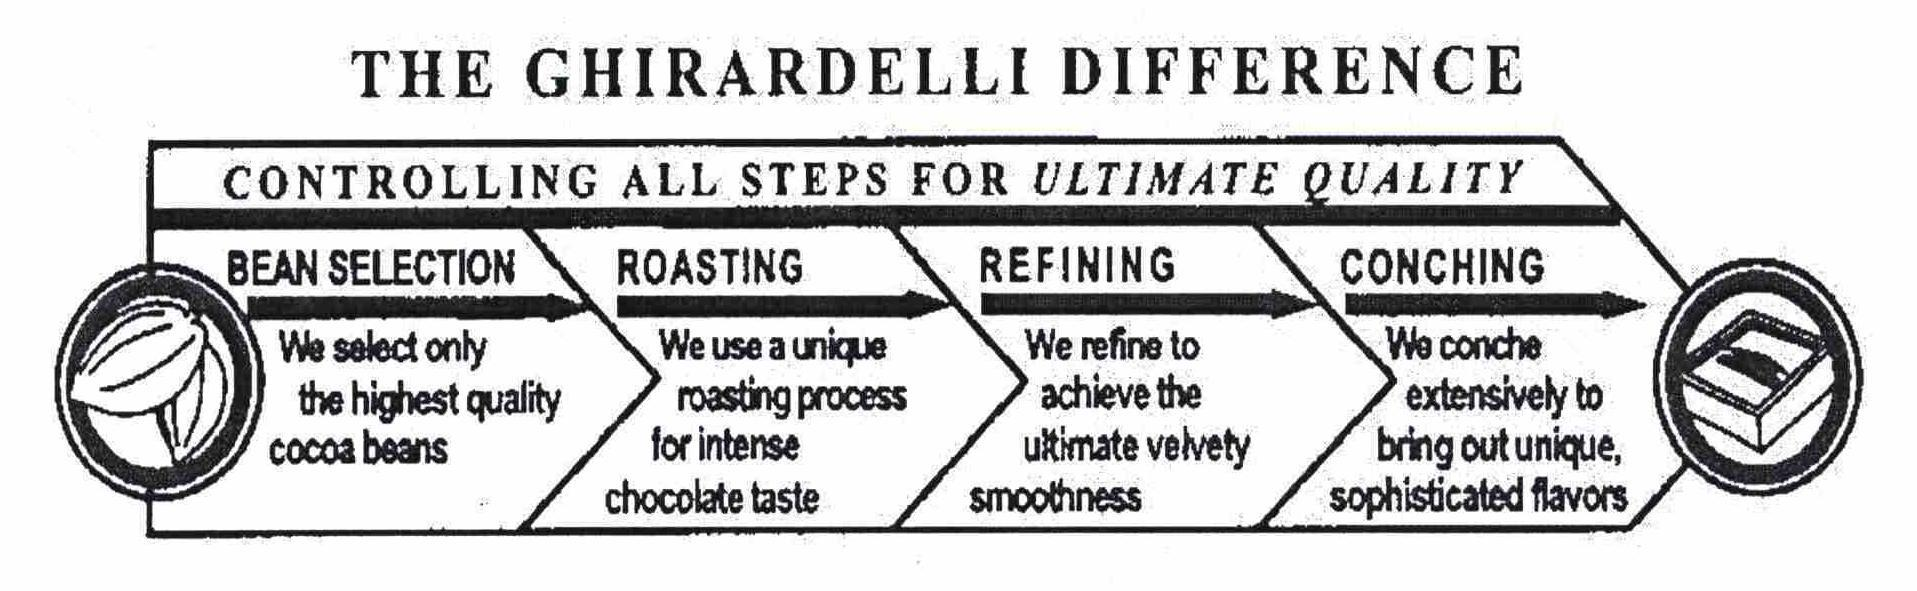  THE GHIRARDELLI DIFFERENCE CONTROLLING ALL STEPS FOR ULTIMATE QUALITY BEAN SELECTION WE SELECT ONLY THE HIGHEST QUALITY COCOA BEANS ROASTING WE USE UNIQUE ROASTING PROCESS FOR INTENSE CHOCOLATE TASTE REFINING WE REFINE TO ACHIEVE THE ULTIMATE VELVETY SMOOT